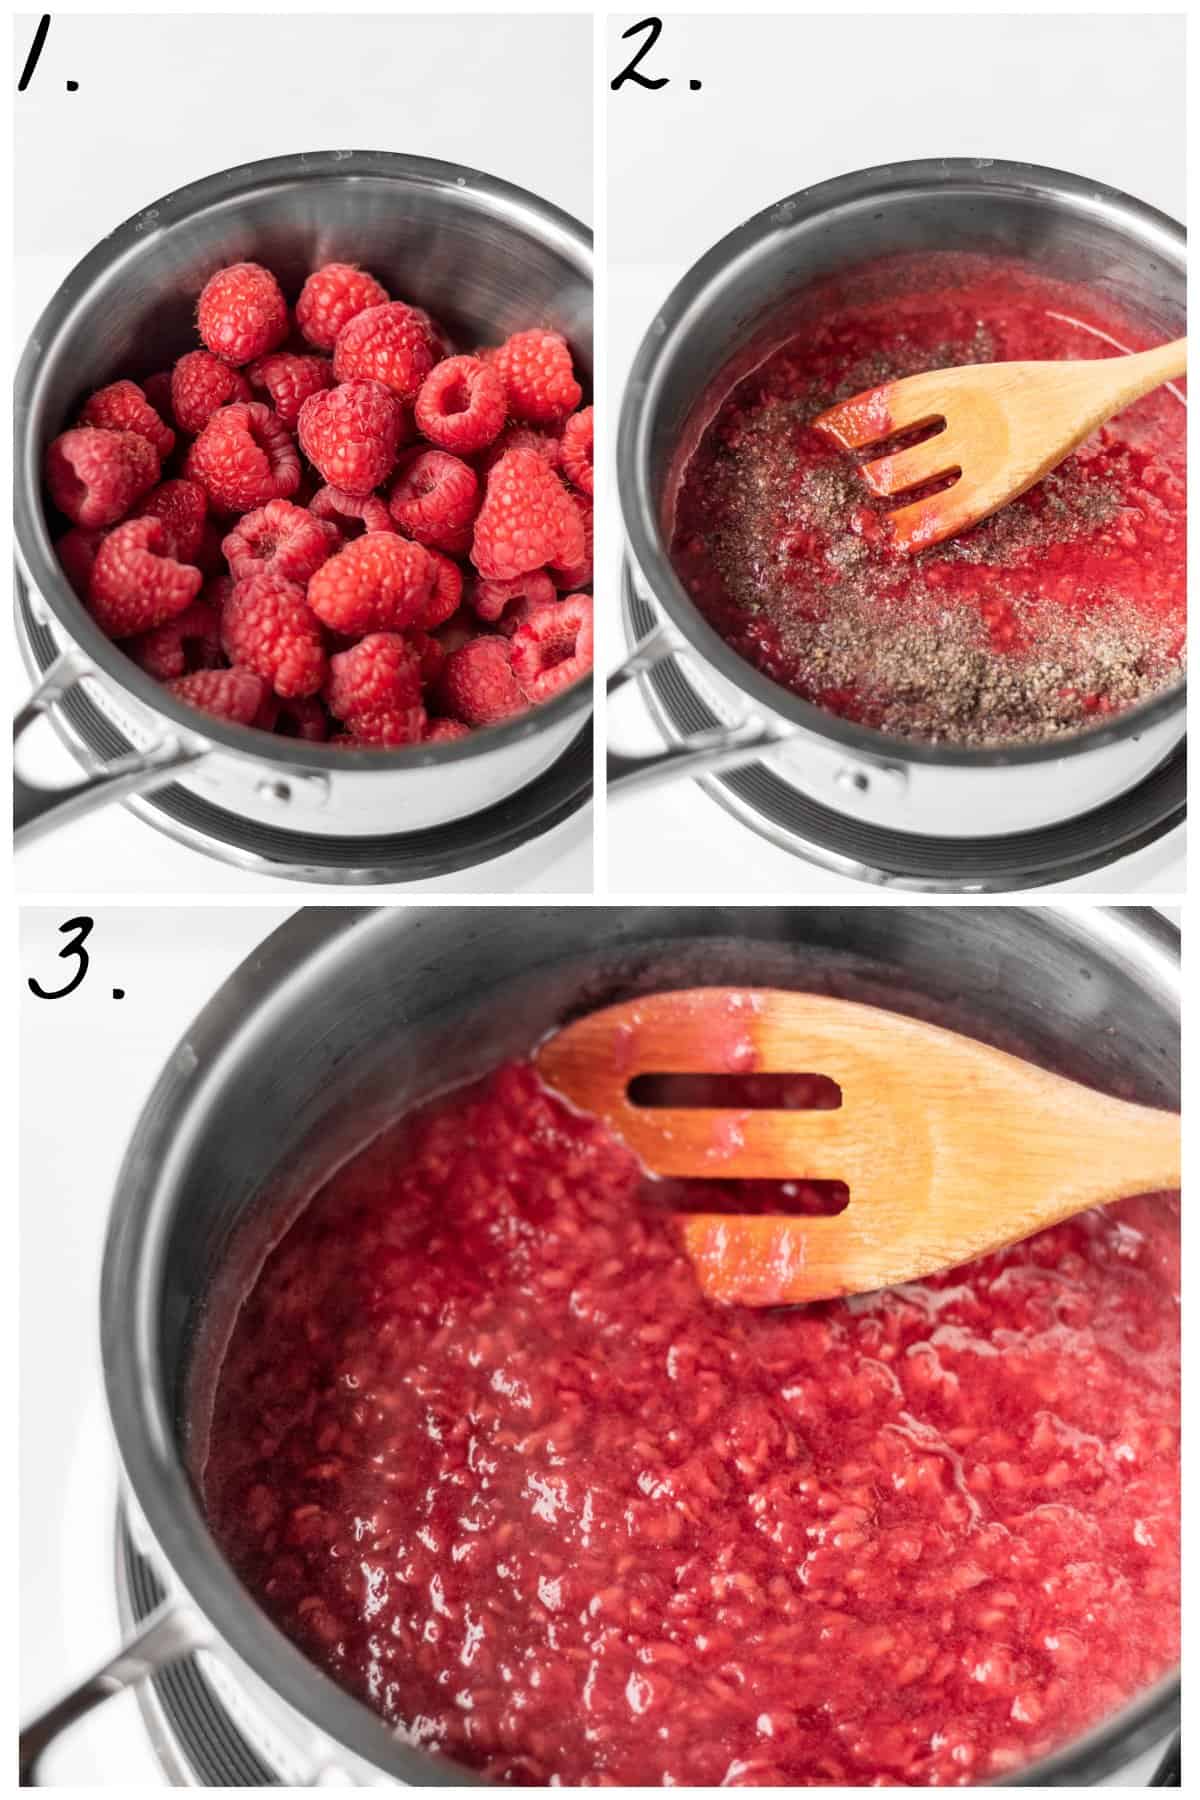 Three process photos of cooking down fresh berries in a saucepan.